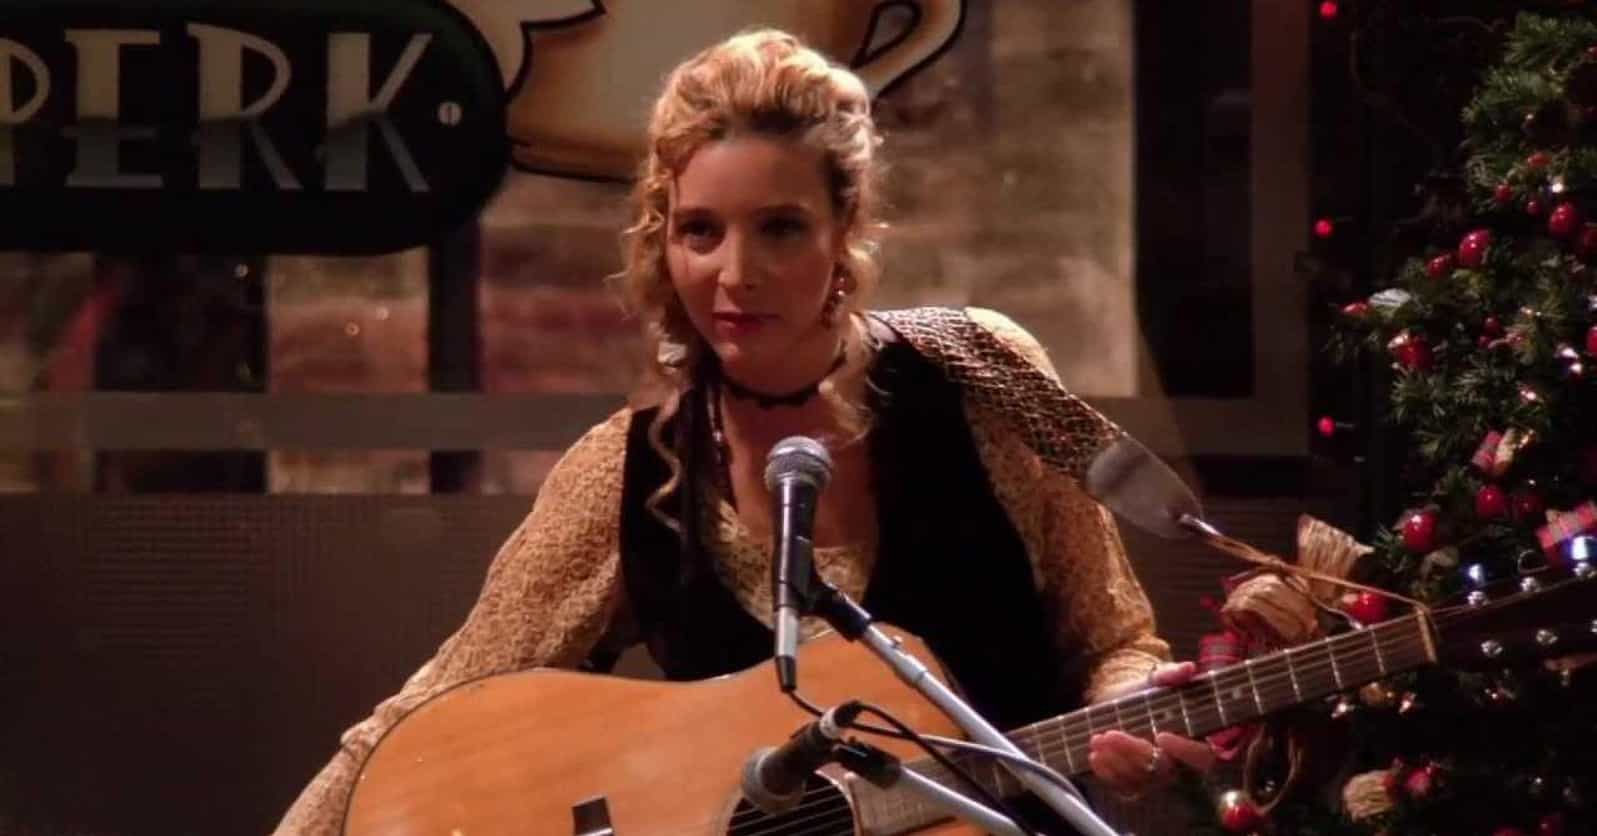 Despite The Laughs, Phoebe’s Backstory On ‘Friends’ Is Pretty Dark